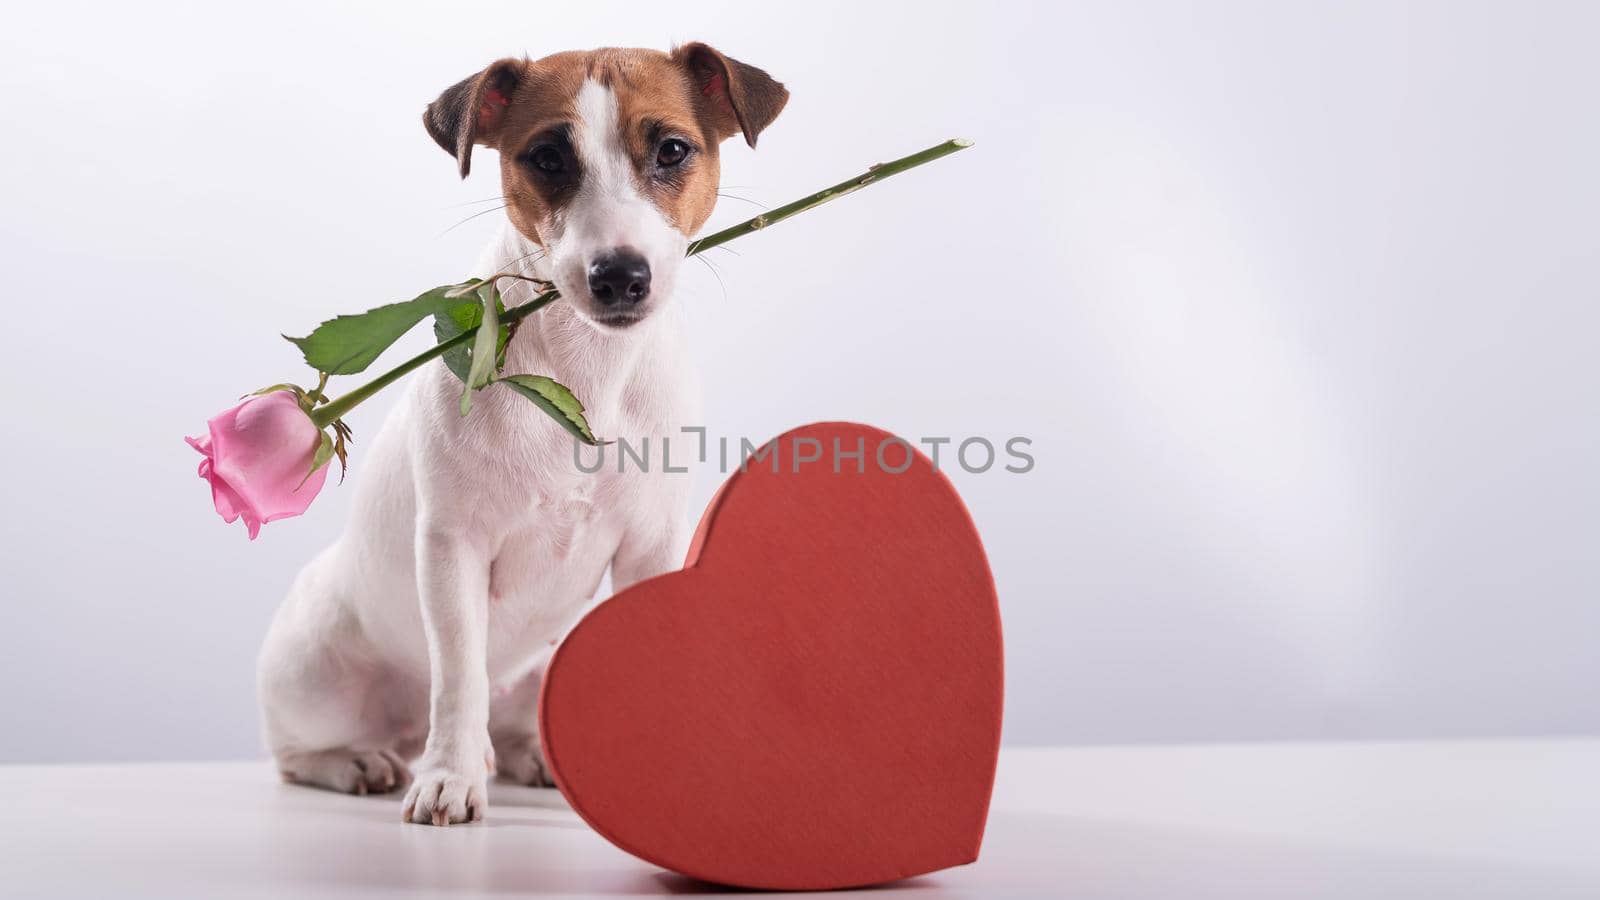 A cute little dog sits next to a heart-shaped box and holds a pink rose in his mouth on a white background. Valentine's day gift.